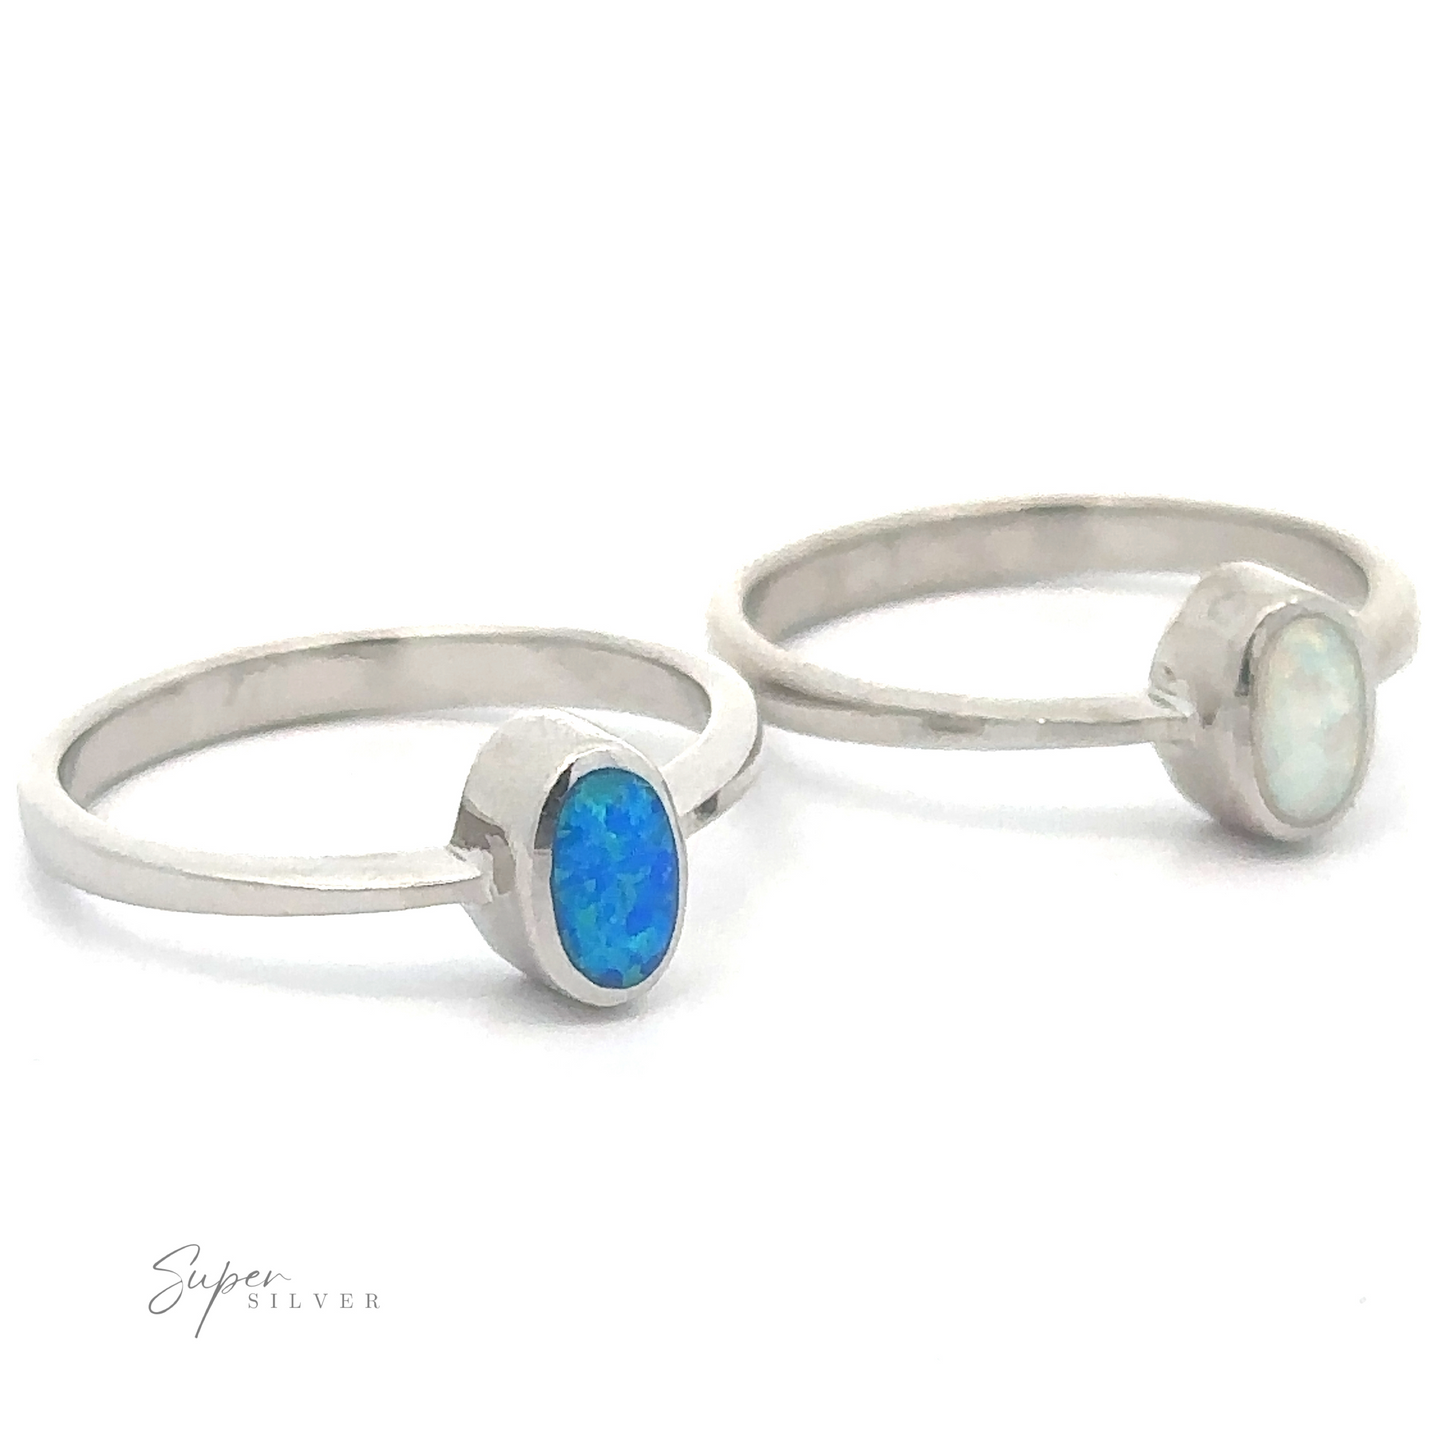 Two simple oval lab created opal rings with blue and white gemstones on a white background.